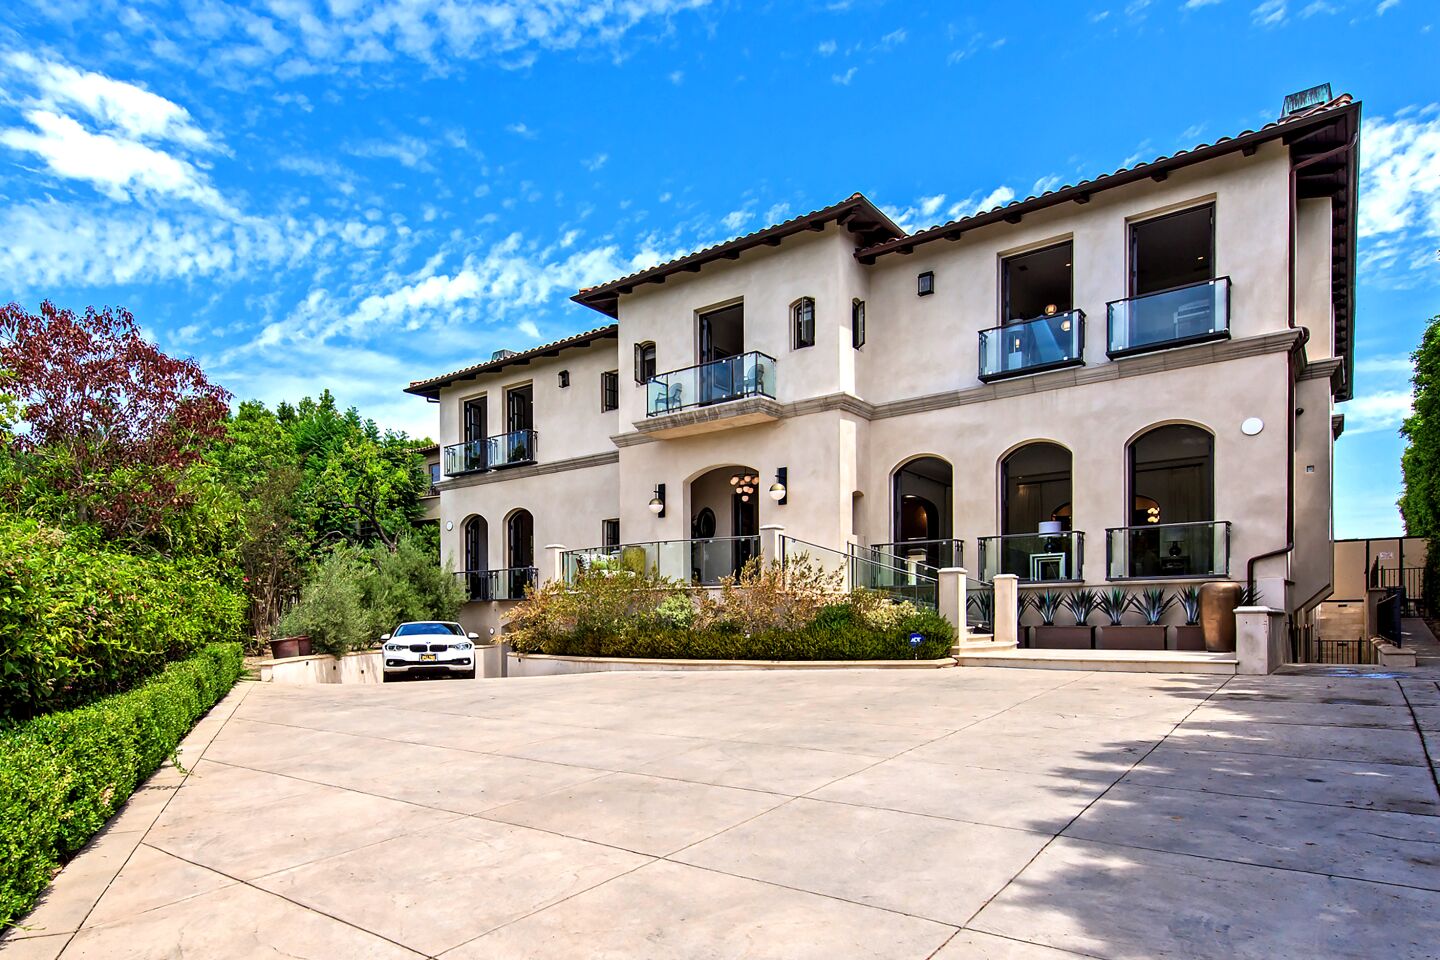 A gated driveway approaches the 13,300-square-foot home lined with oval windows and wrought-iron accents. The eight-bedroom, 12-bathroom home opens to a 25,000-gallon pool surrounded by a pavilion, lounge and lawn.